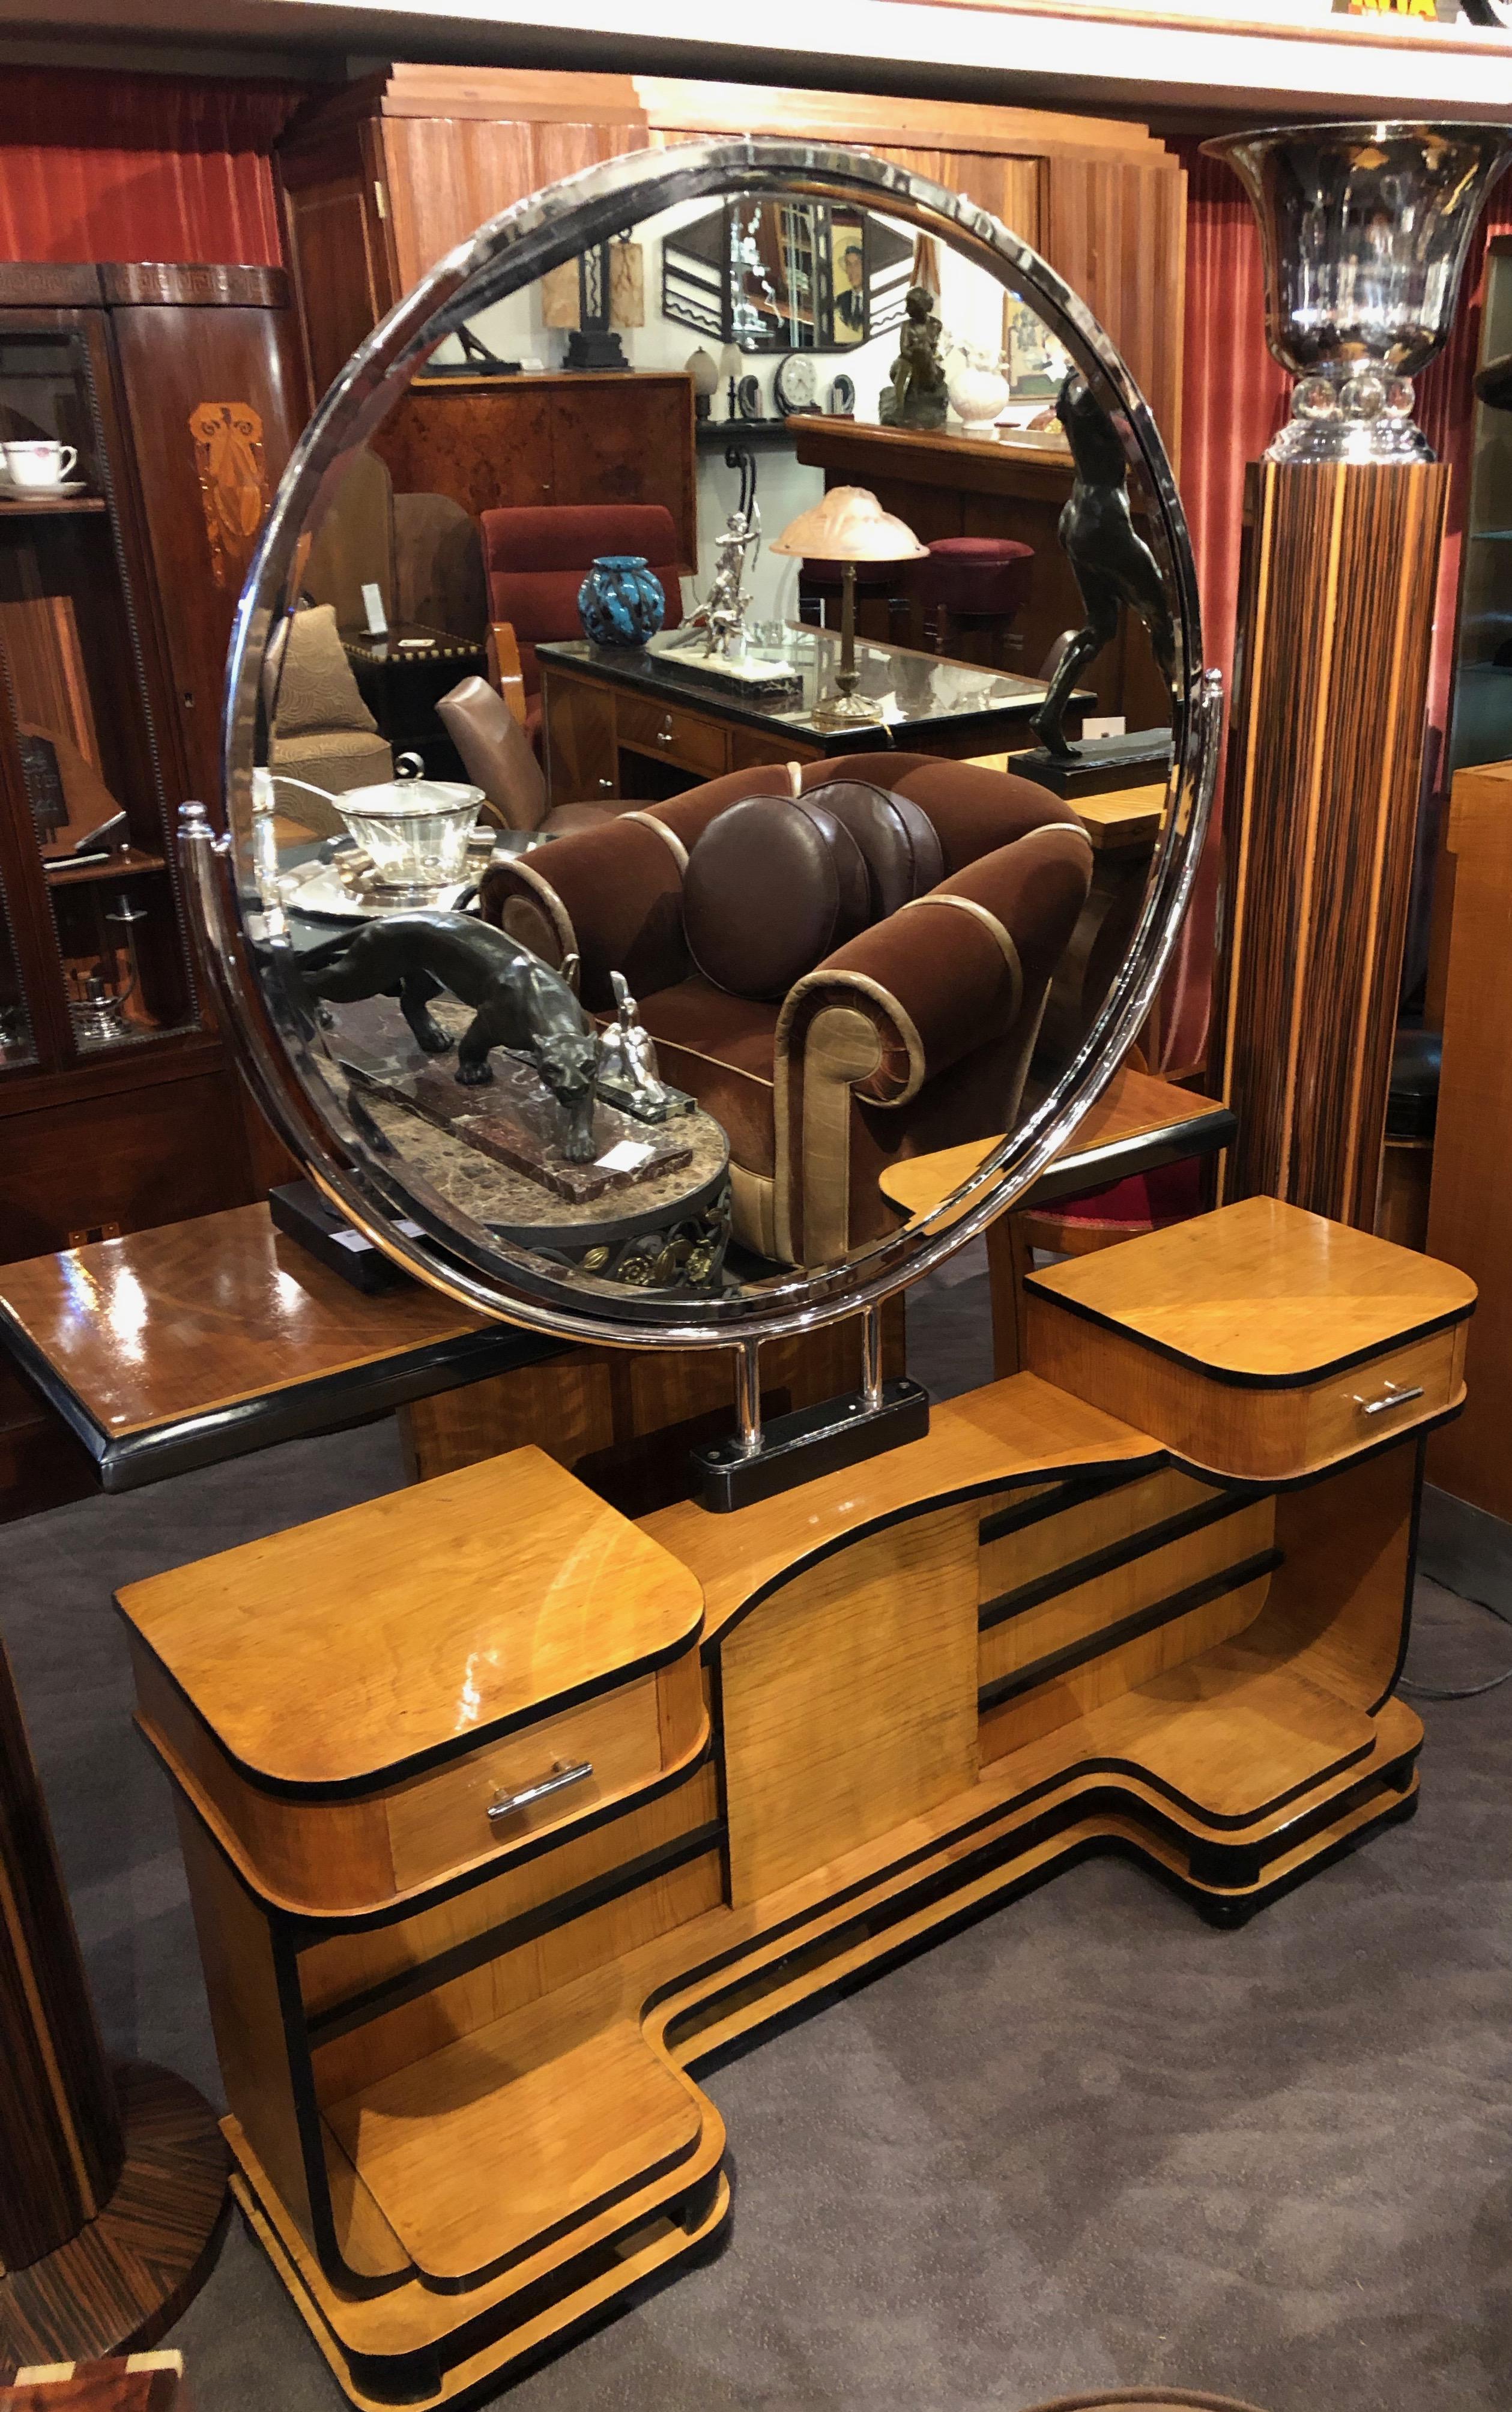 Modernist Art Deco vanity in two-tone wood. Purchased in Argentina, inspired by Europe. This stunning vanity with matching stool is a pleasure to the eye. Large beveled over-sized chrome mirror with slight swivel. Two small drawers with chrome